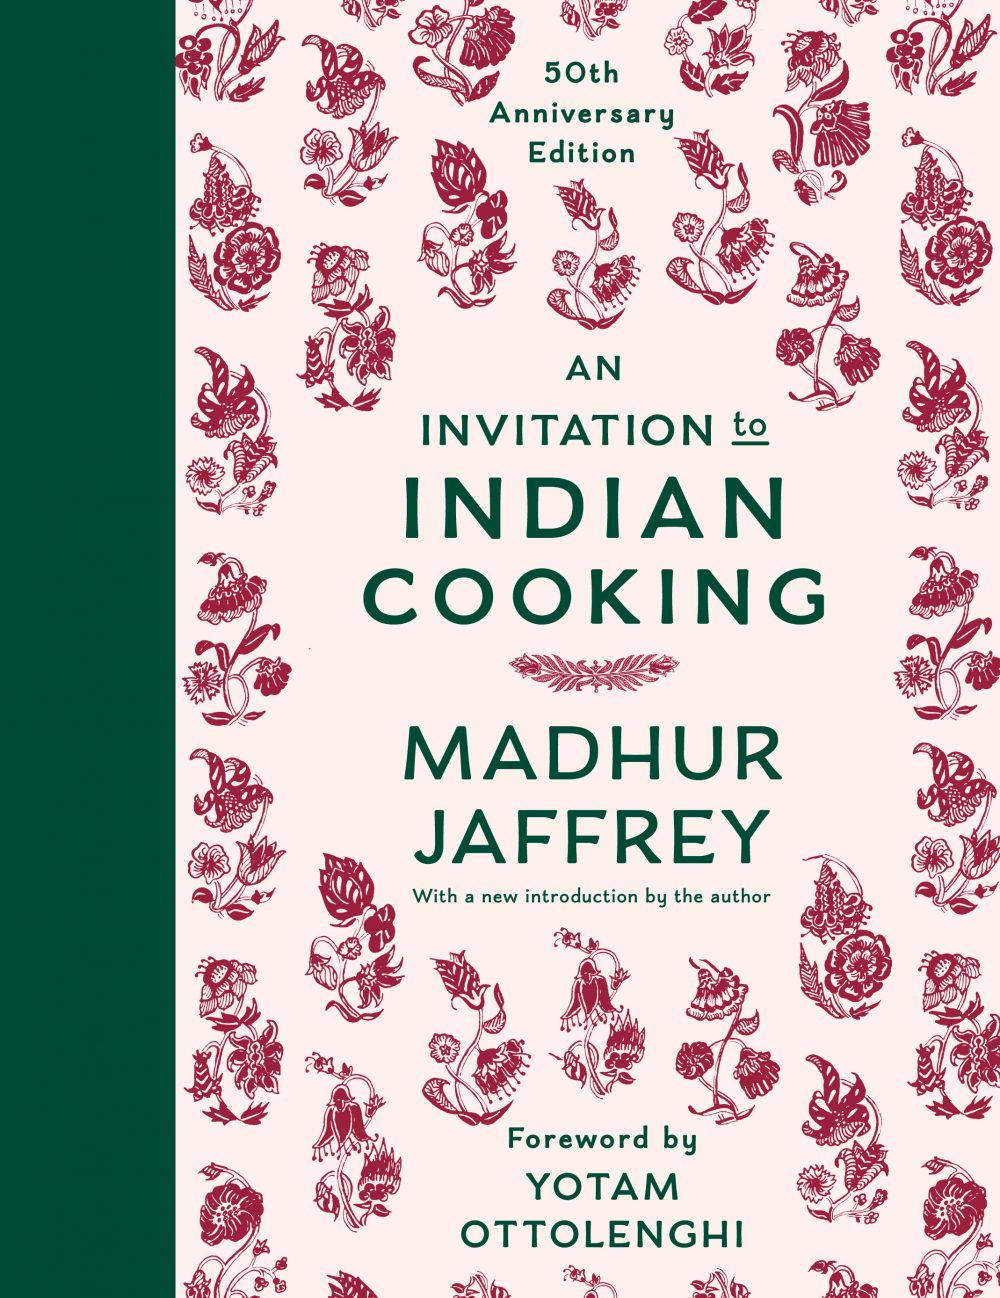 Book review i43 An Invitation to Indian Cooking